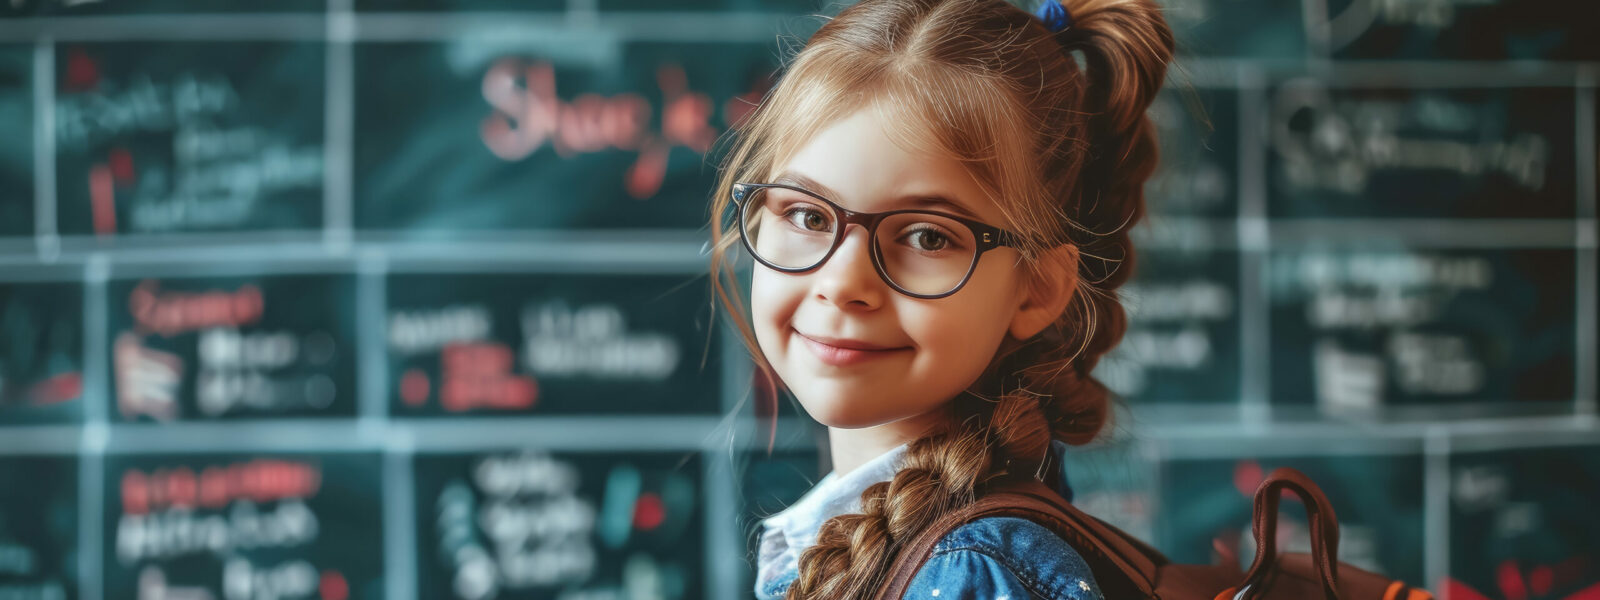 small beautiful girl in a school uniform against the background of a classroom, education, learning, child, kid, schoolgirl, student, pupil, smart person, portrait, face, knowledge, children, smiling